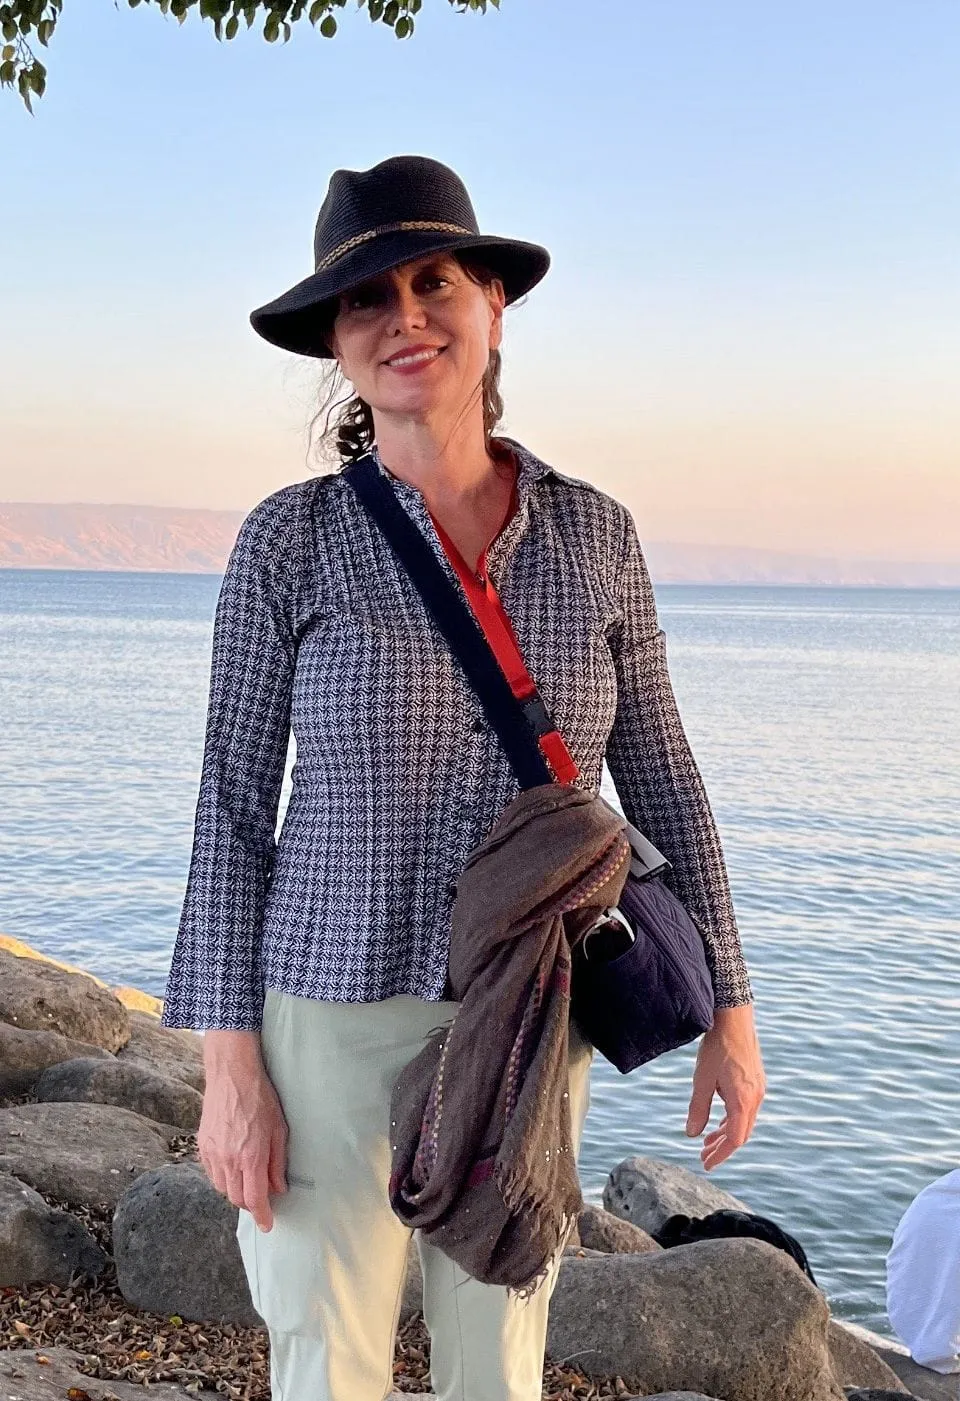 Dr Laurie in front of the Sea of Galilee